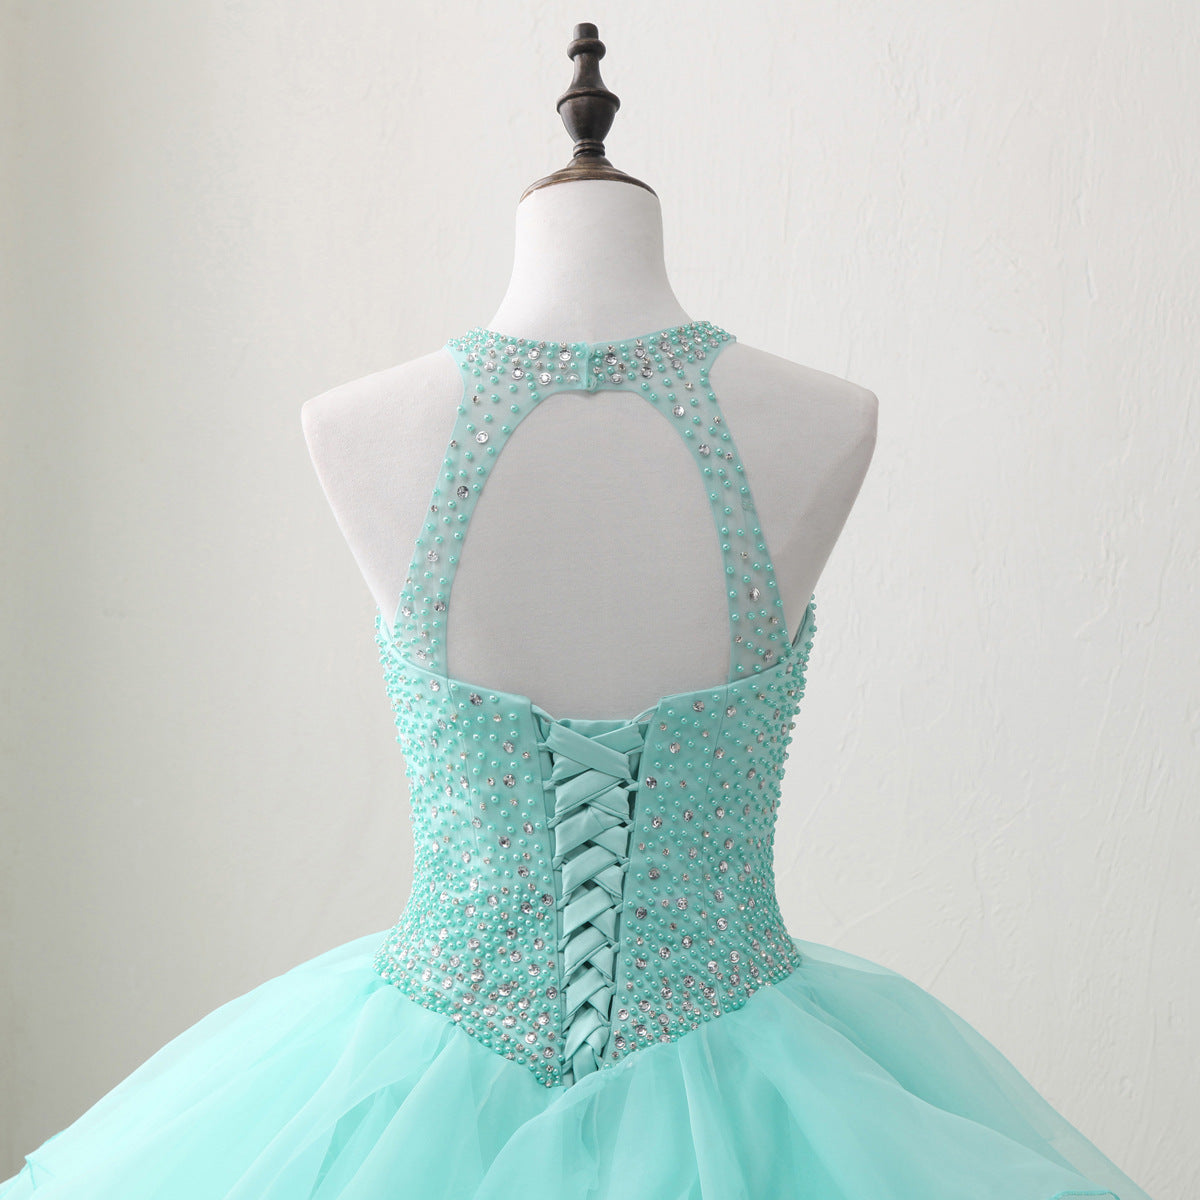 Halter Neck Open Back Mint Quinceanera Dresses Mexican Ball Gown Prom Dress #21011217